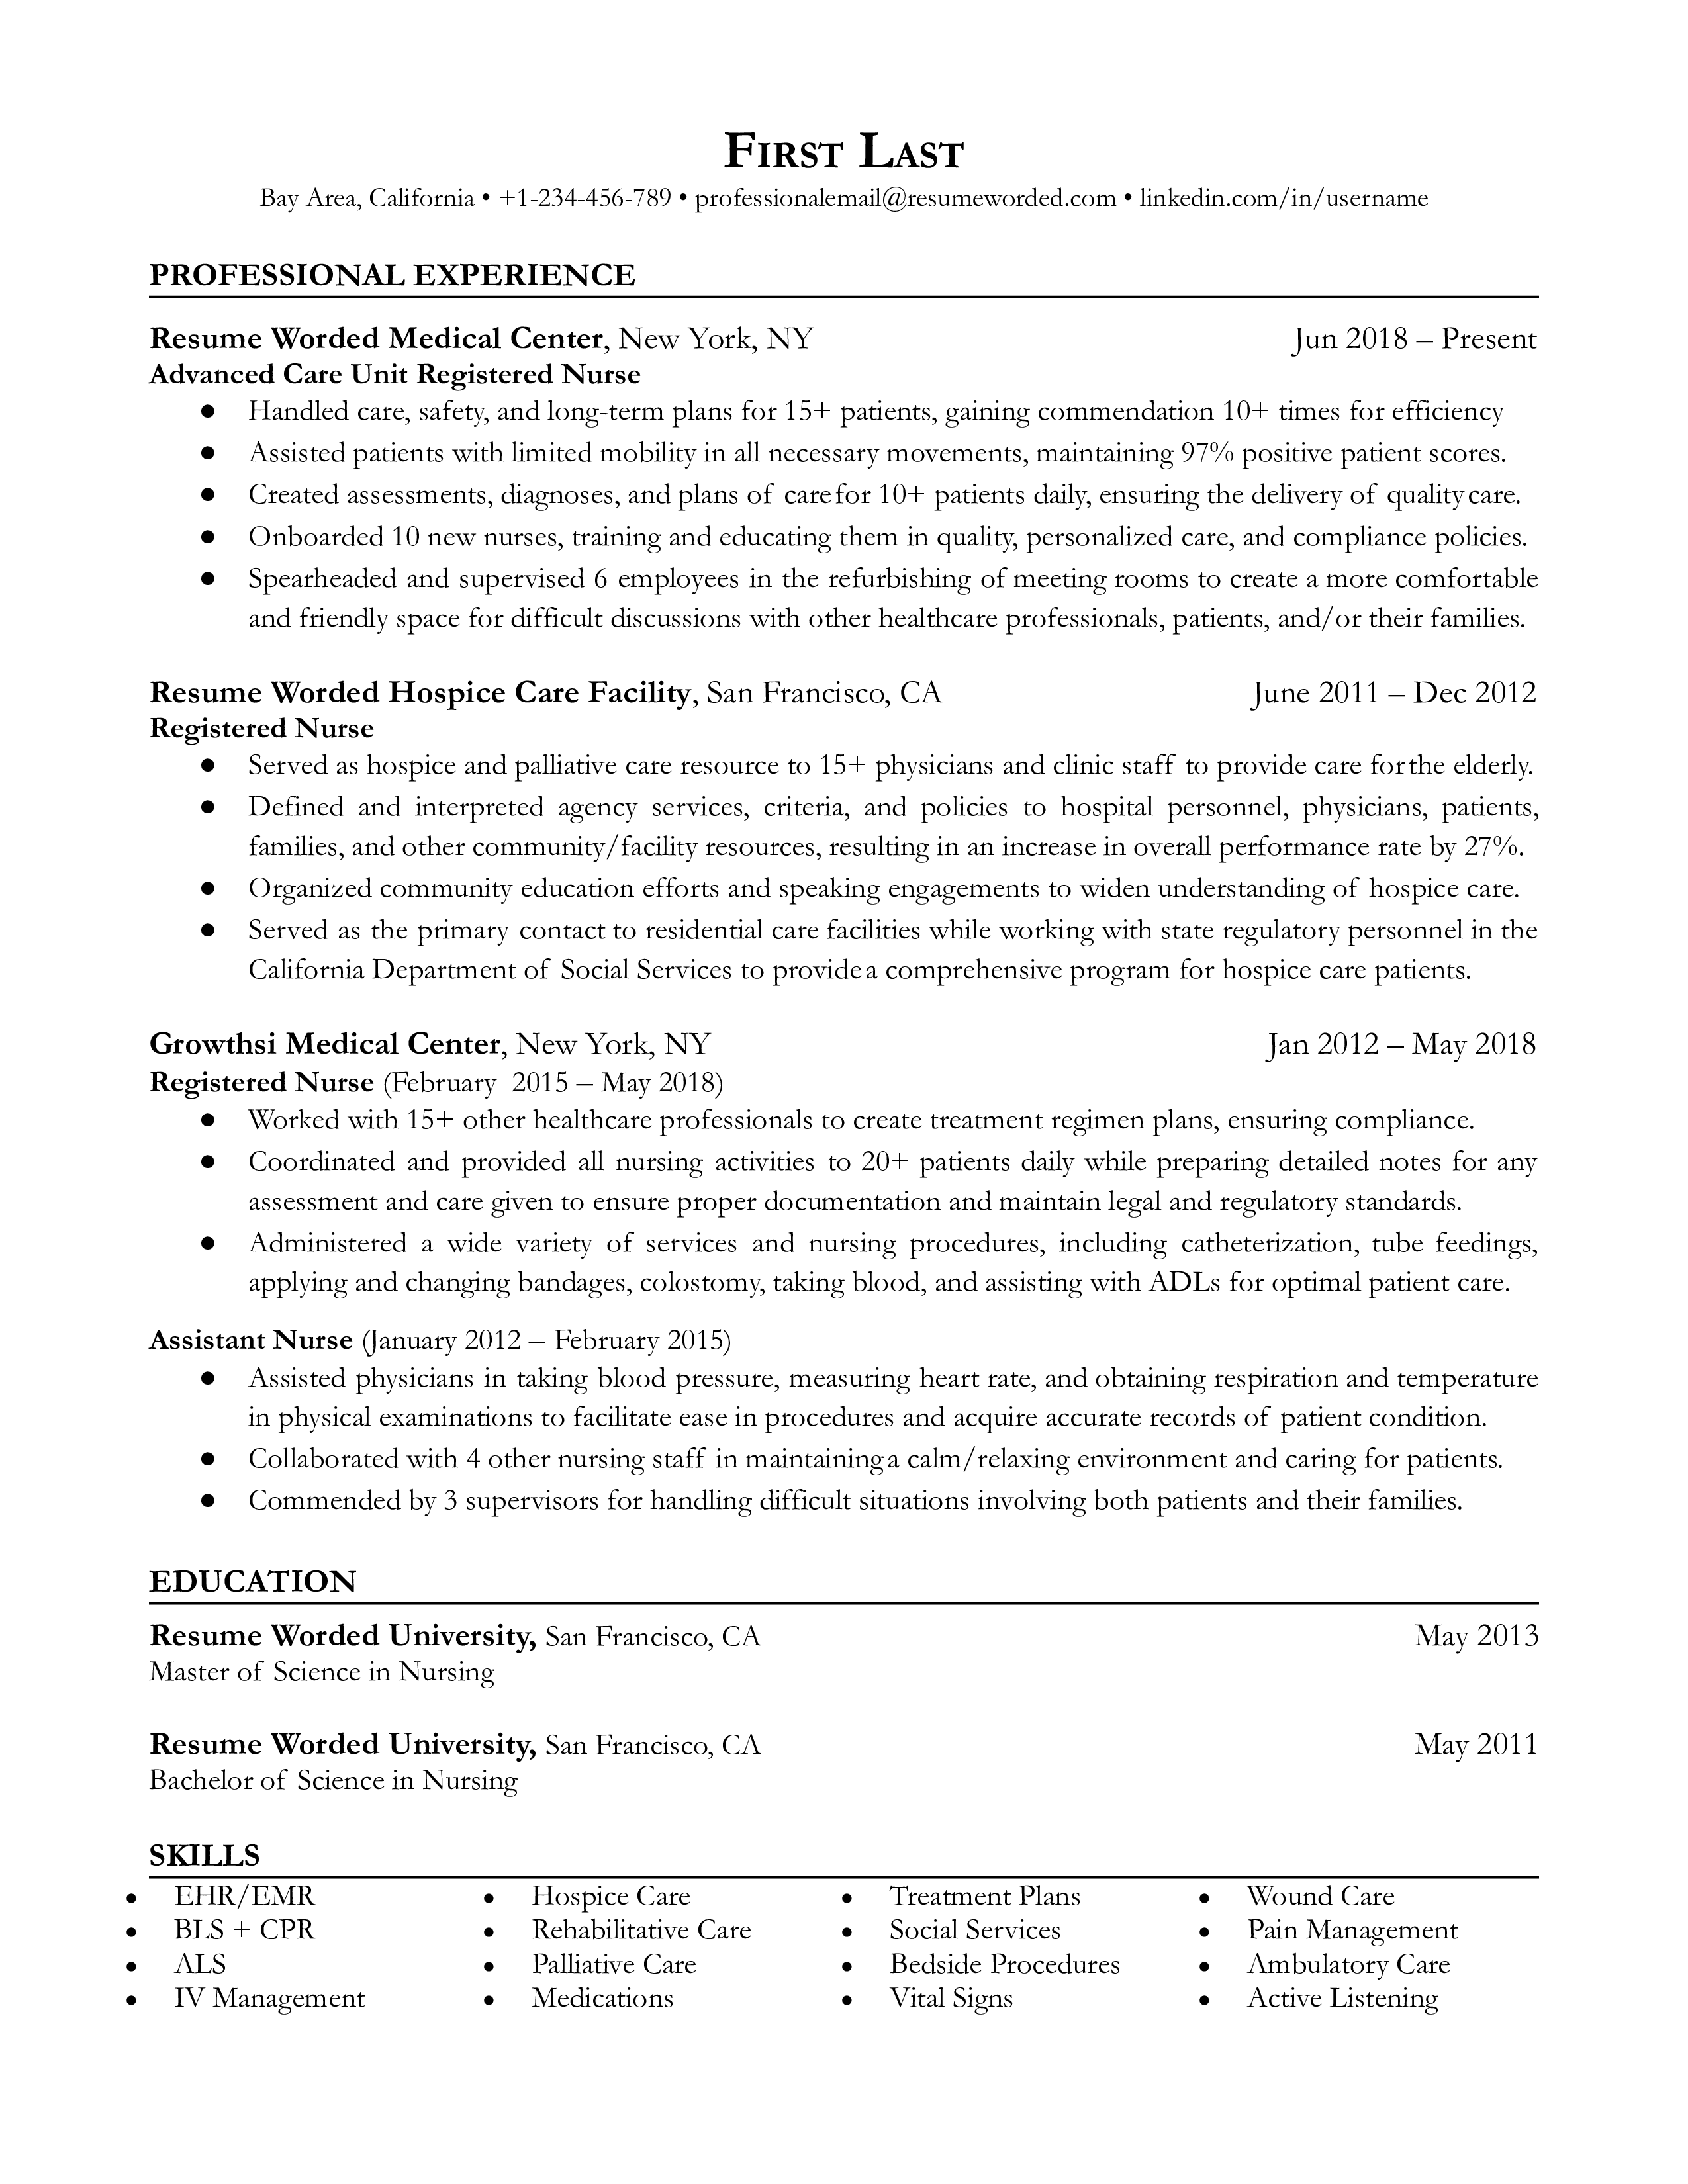 Experienced nurse resume template sample with bullet points featuring strong action verbs to highlight career growth